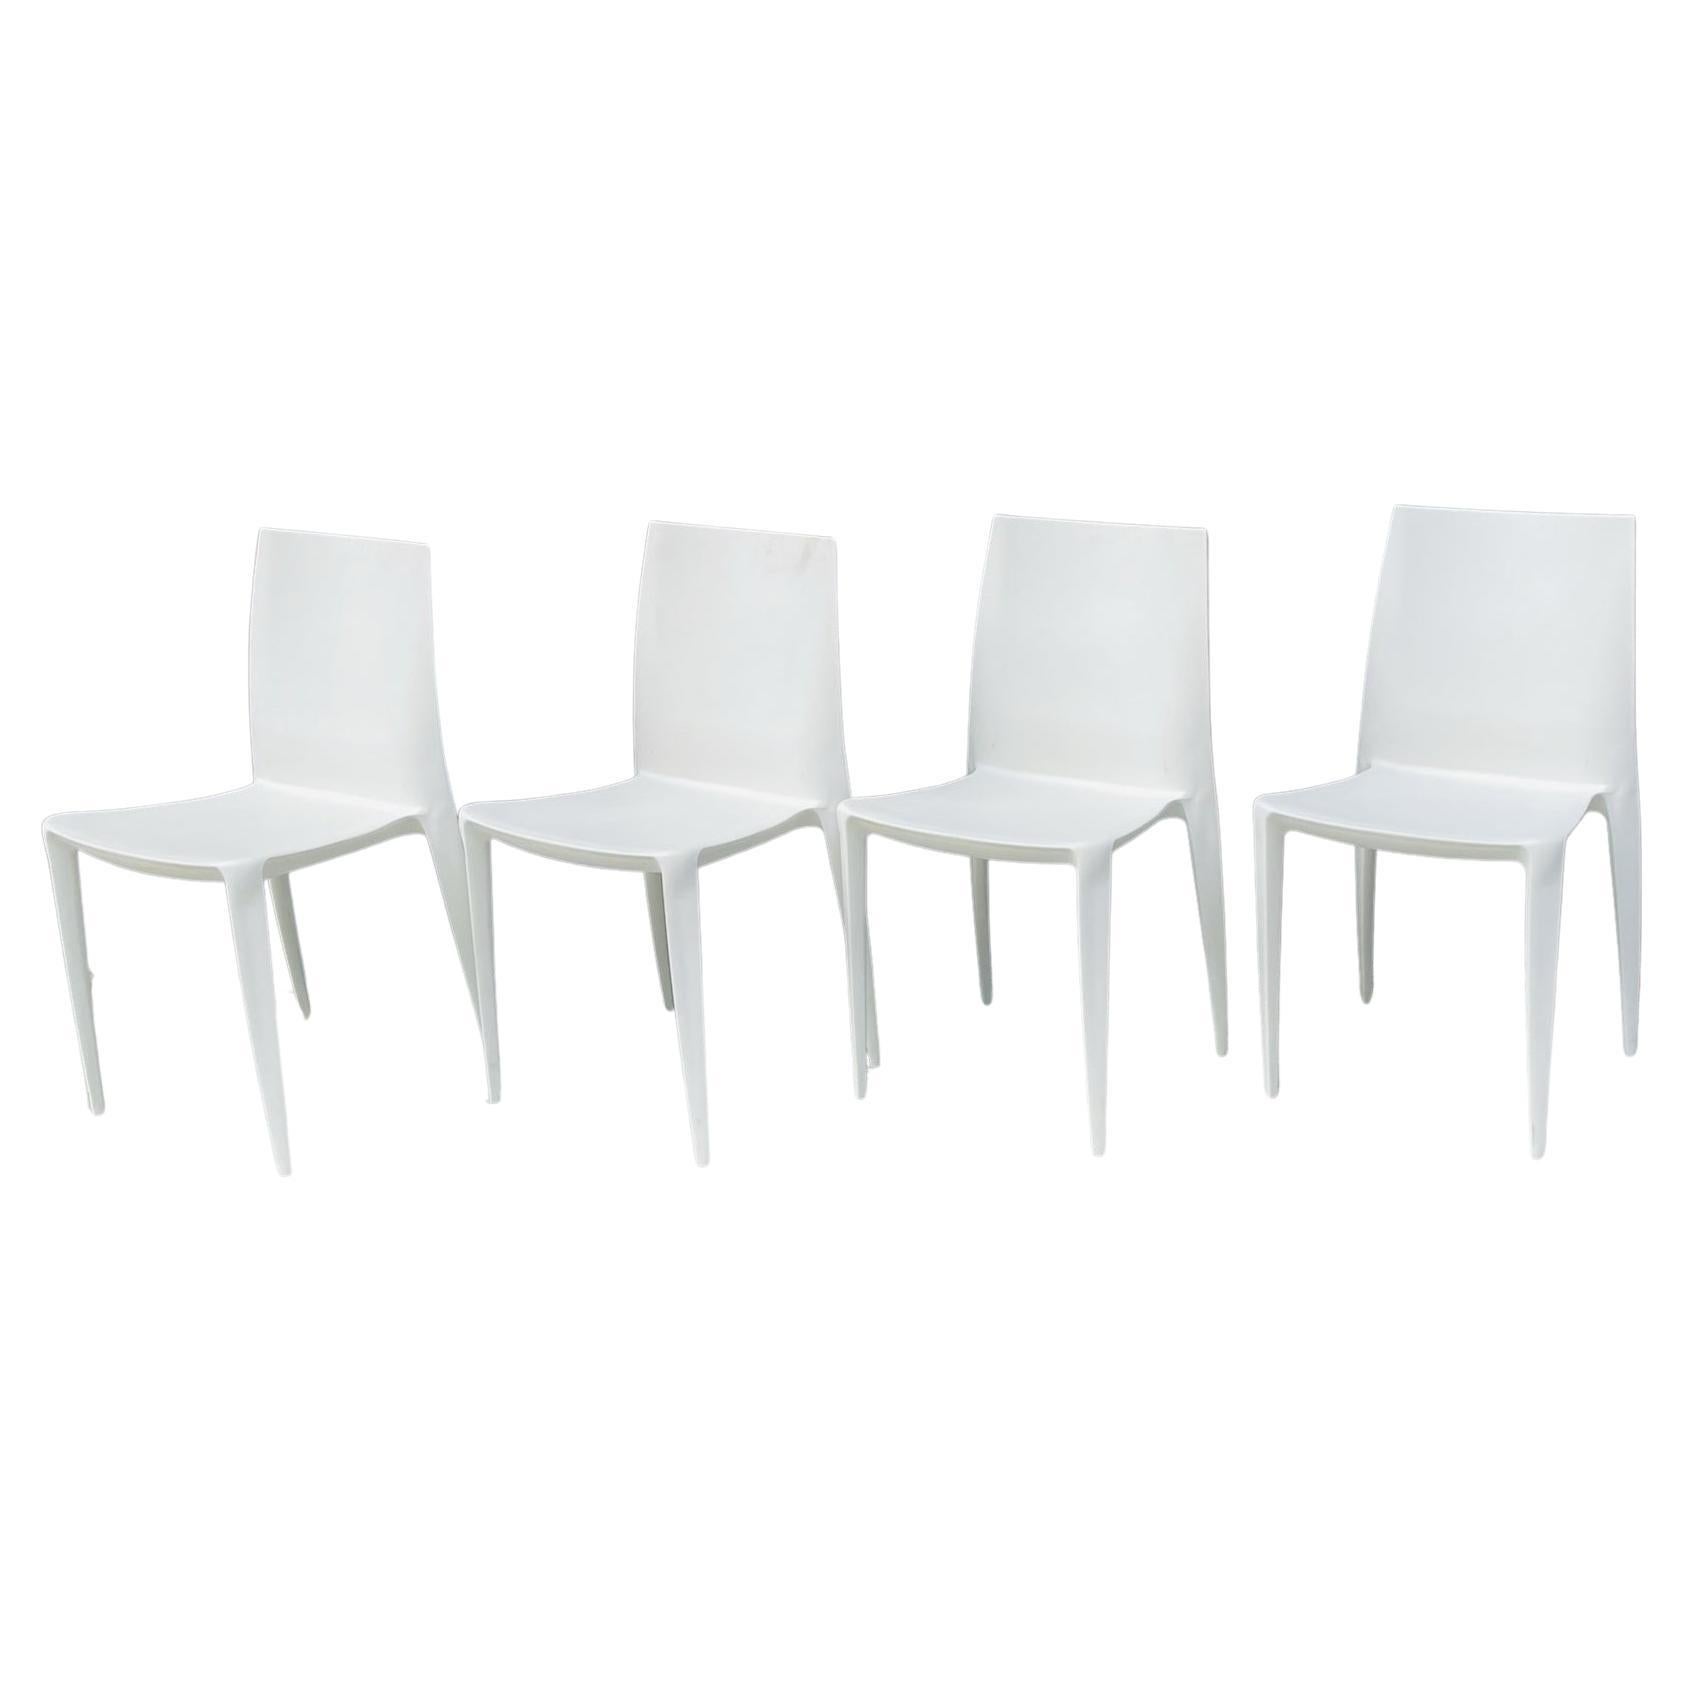 Set of 4 Chairs by Mario Bellini for Heller For Sale